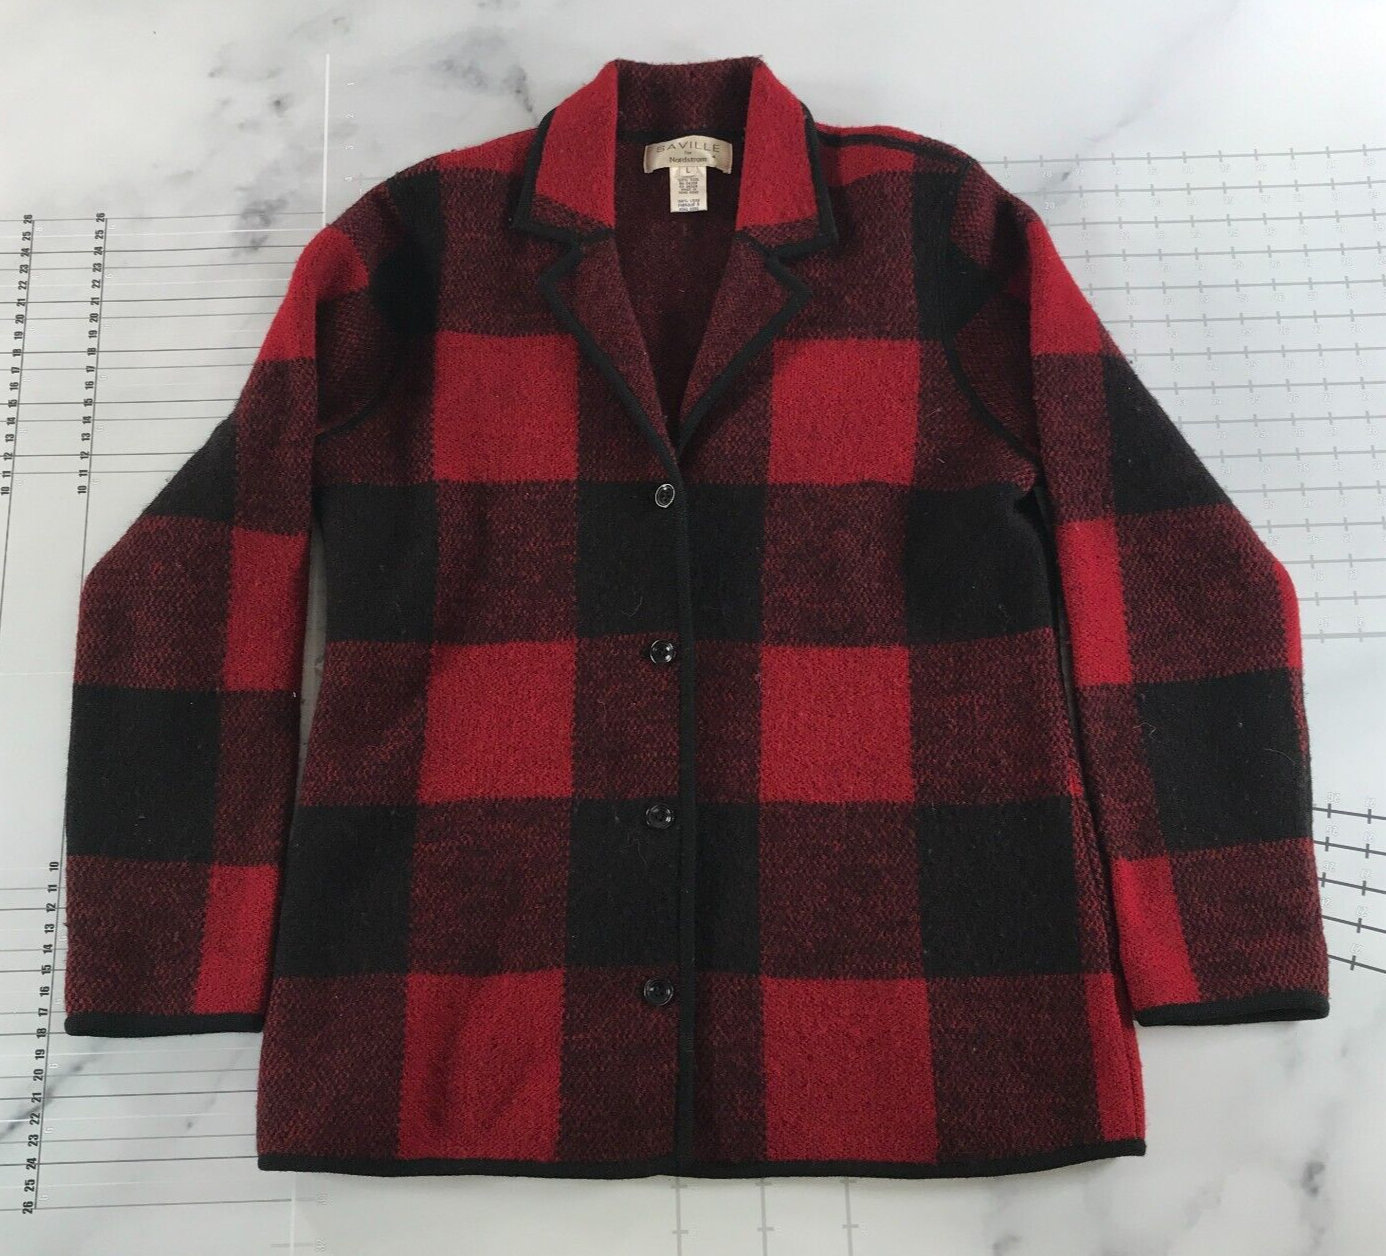 Primary image for Saville Jacket Womens Large Black Red Buffalo Plaid Button Down Wool Collared